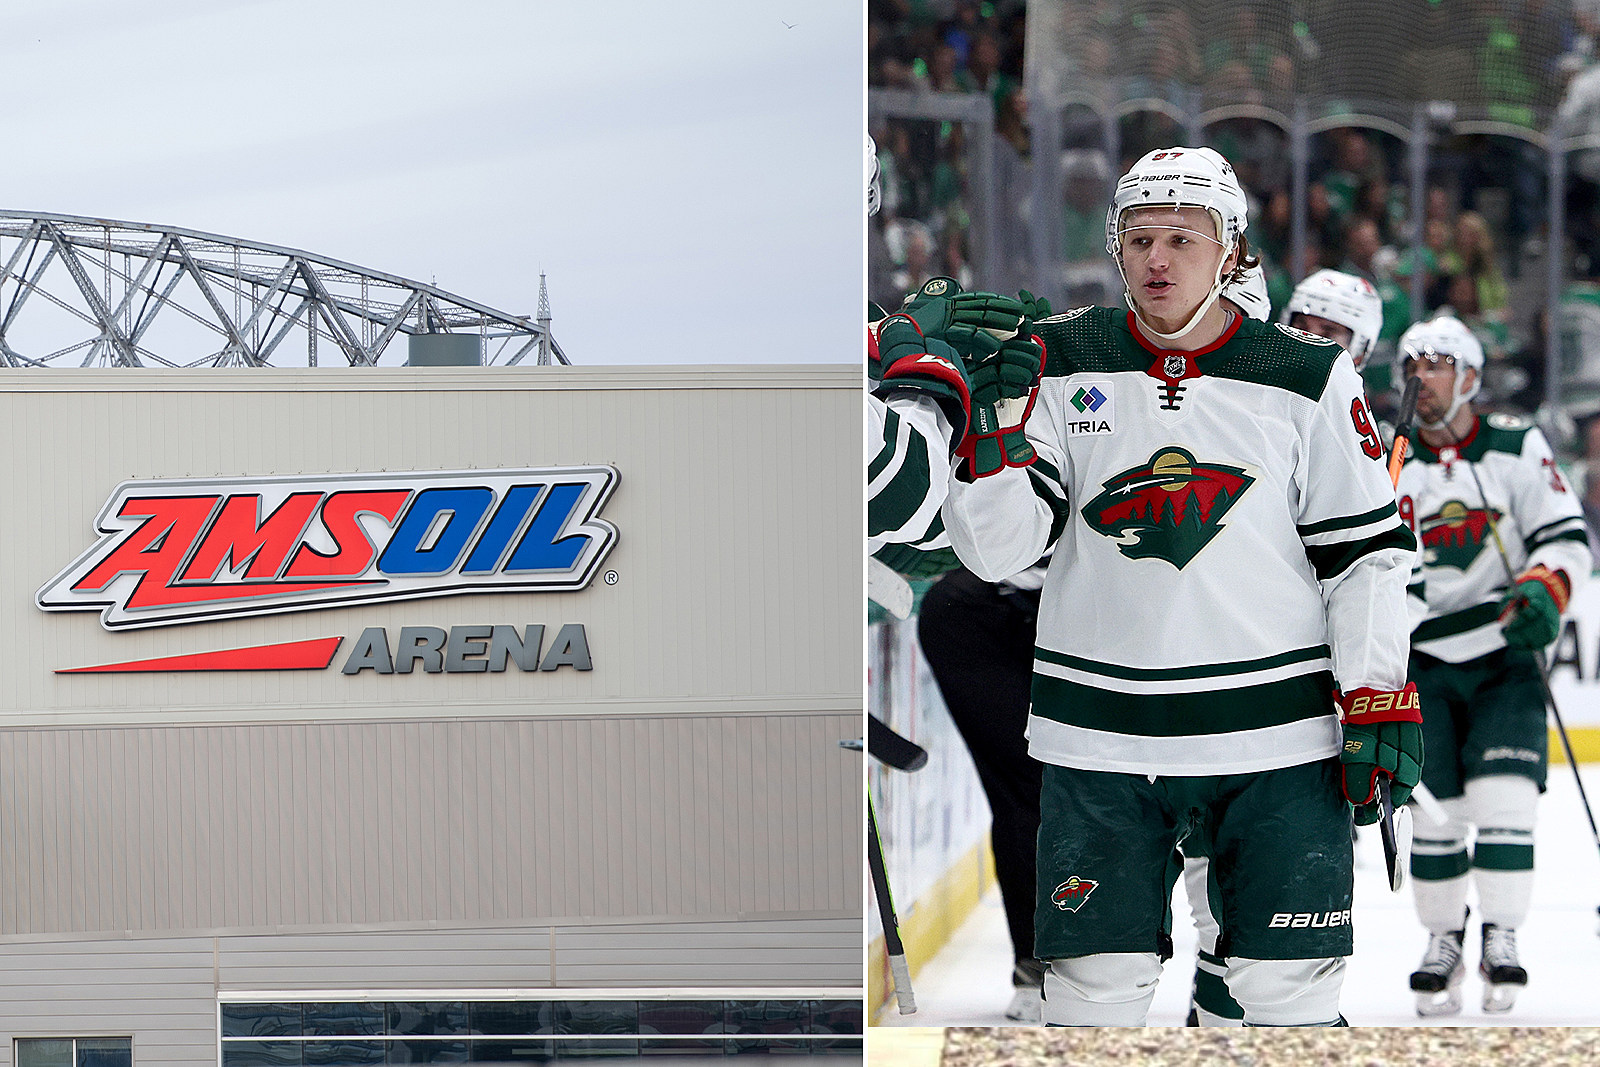 Minnesota Wild on X: This weekend is going to be one for the ages 🤩 join  us for the Crazy Game Of Hockey with new celebs announced, a chance to get  this